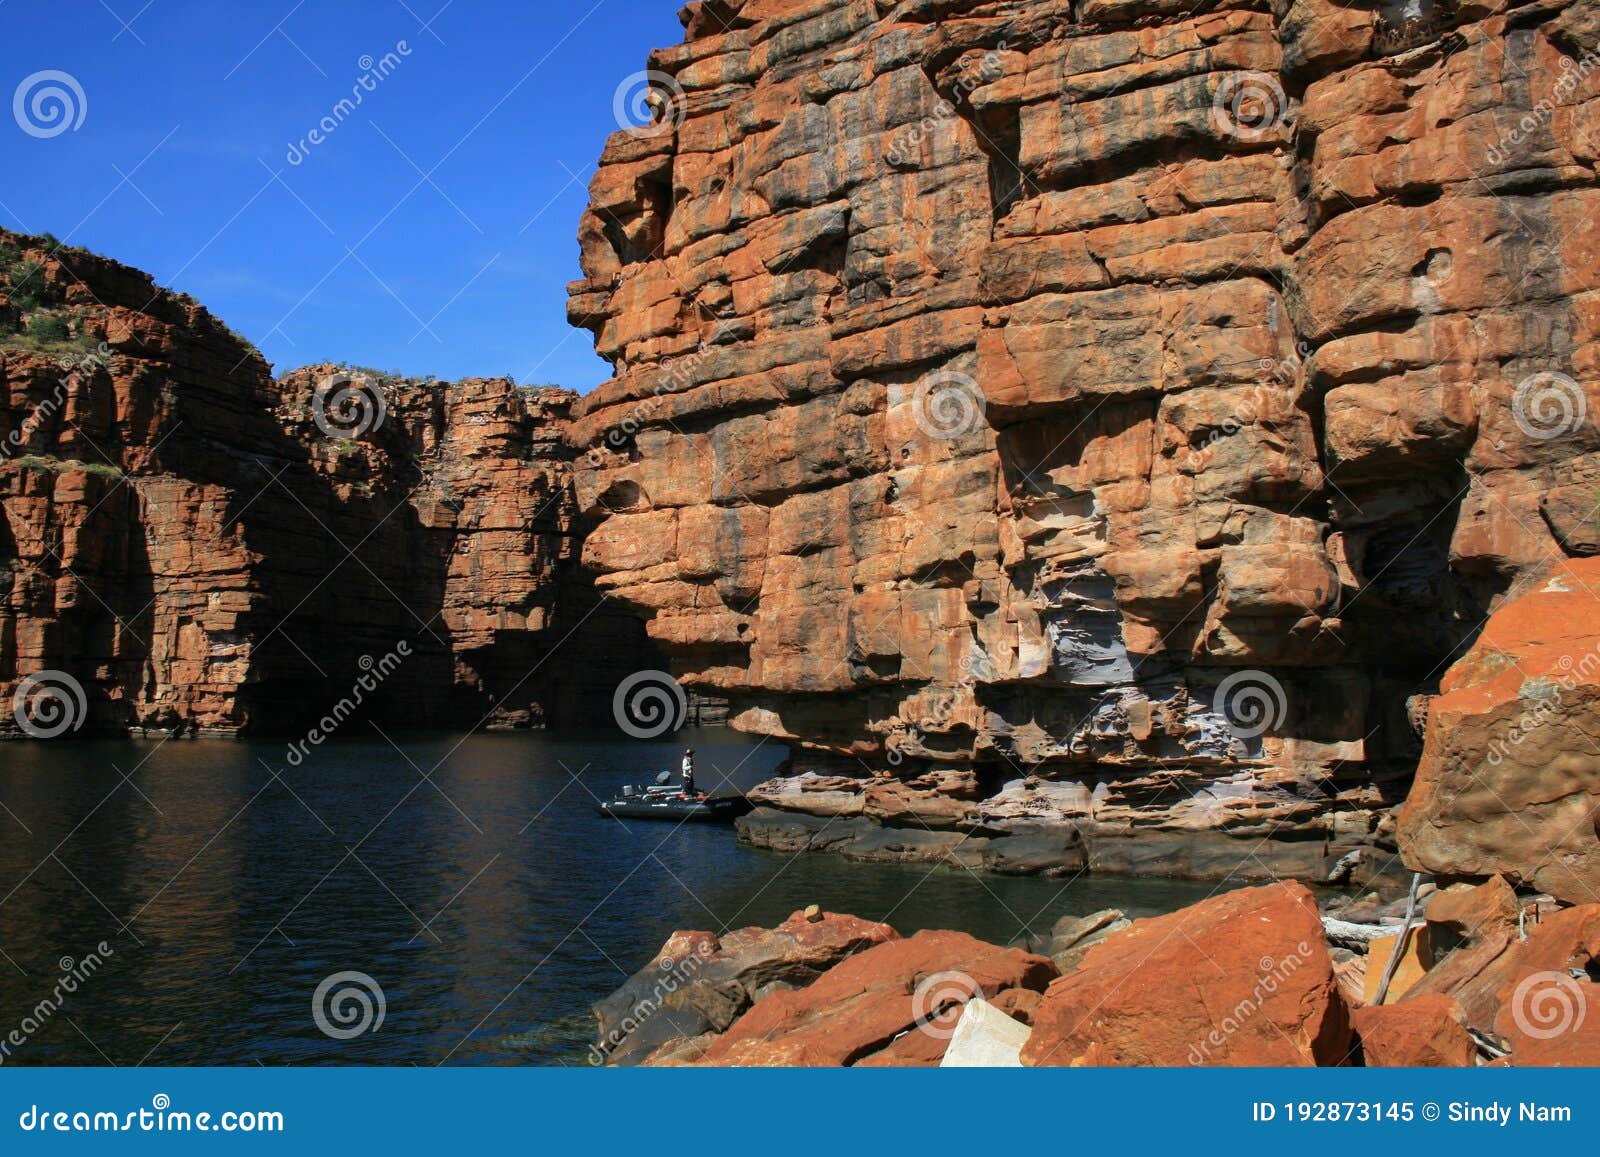 Rock Features Of The Kimberley In Australia Stock Image Image Of Wilderness Blue